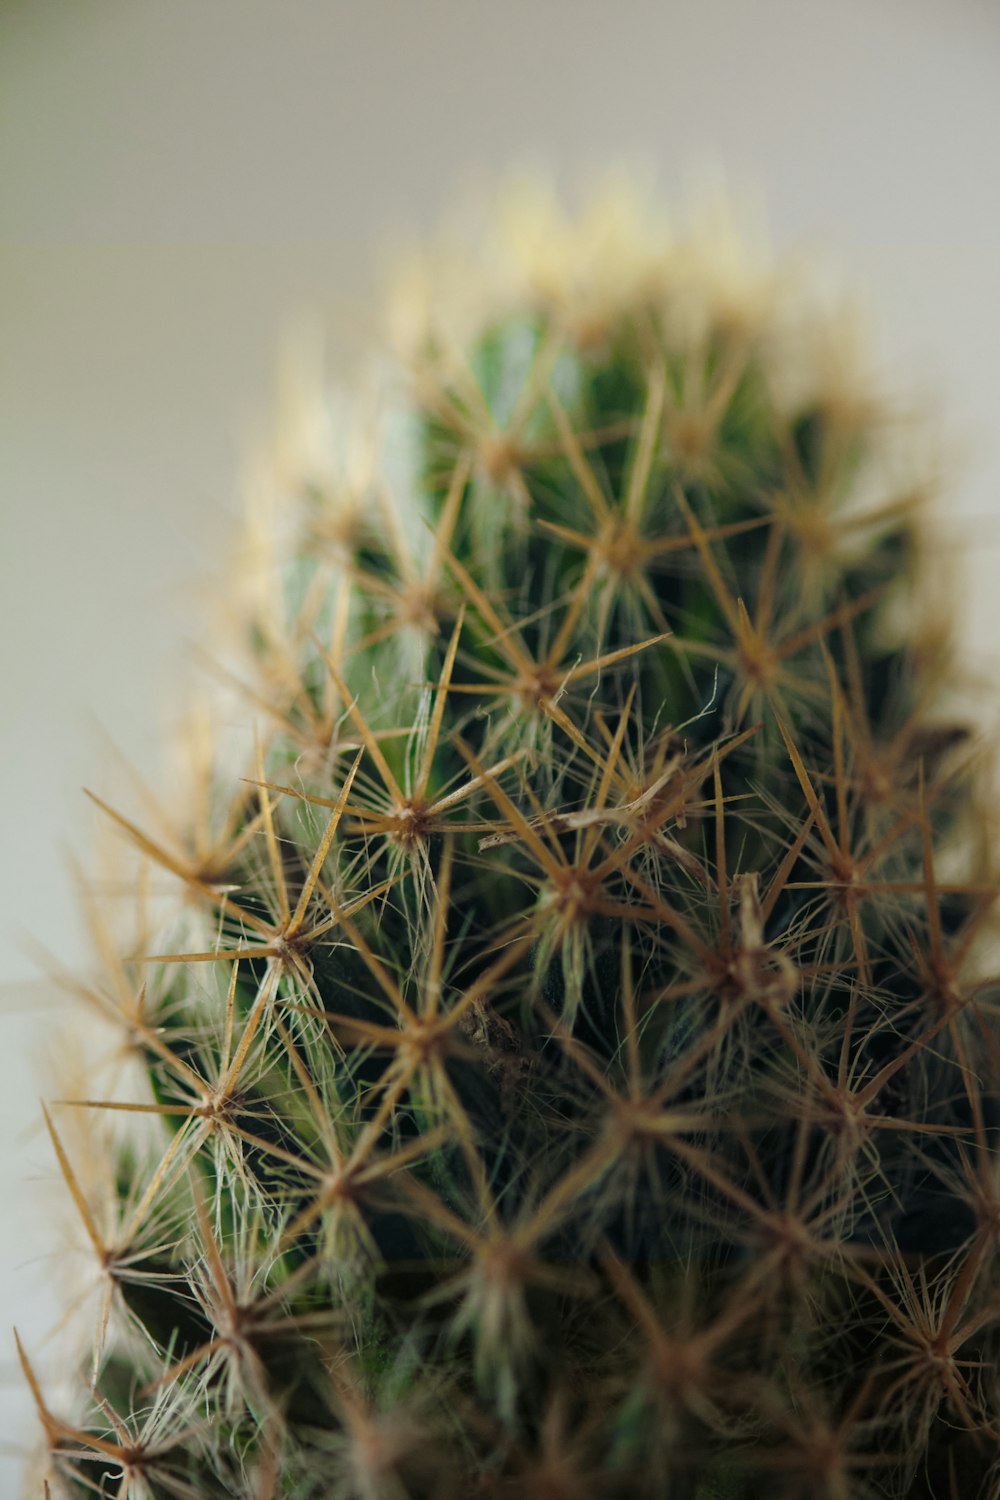 a close up of a cactus with very small needles